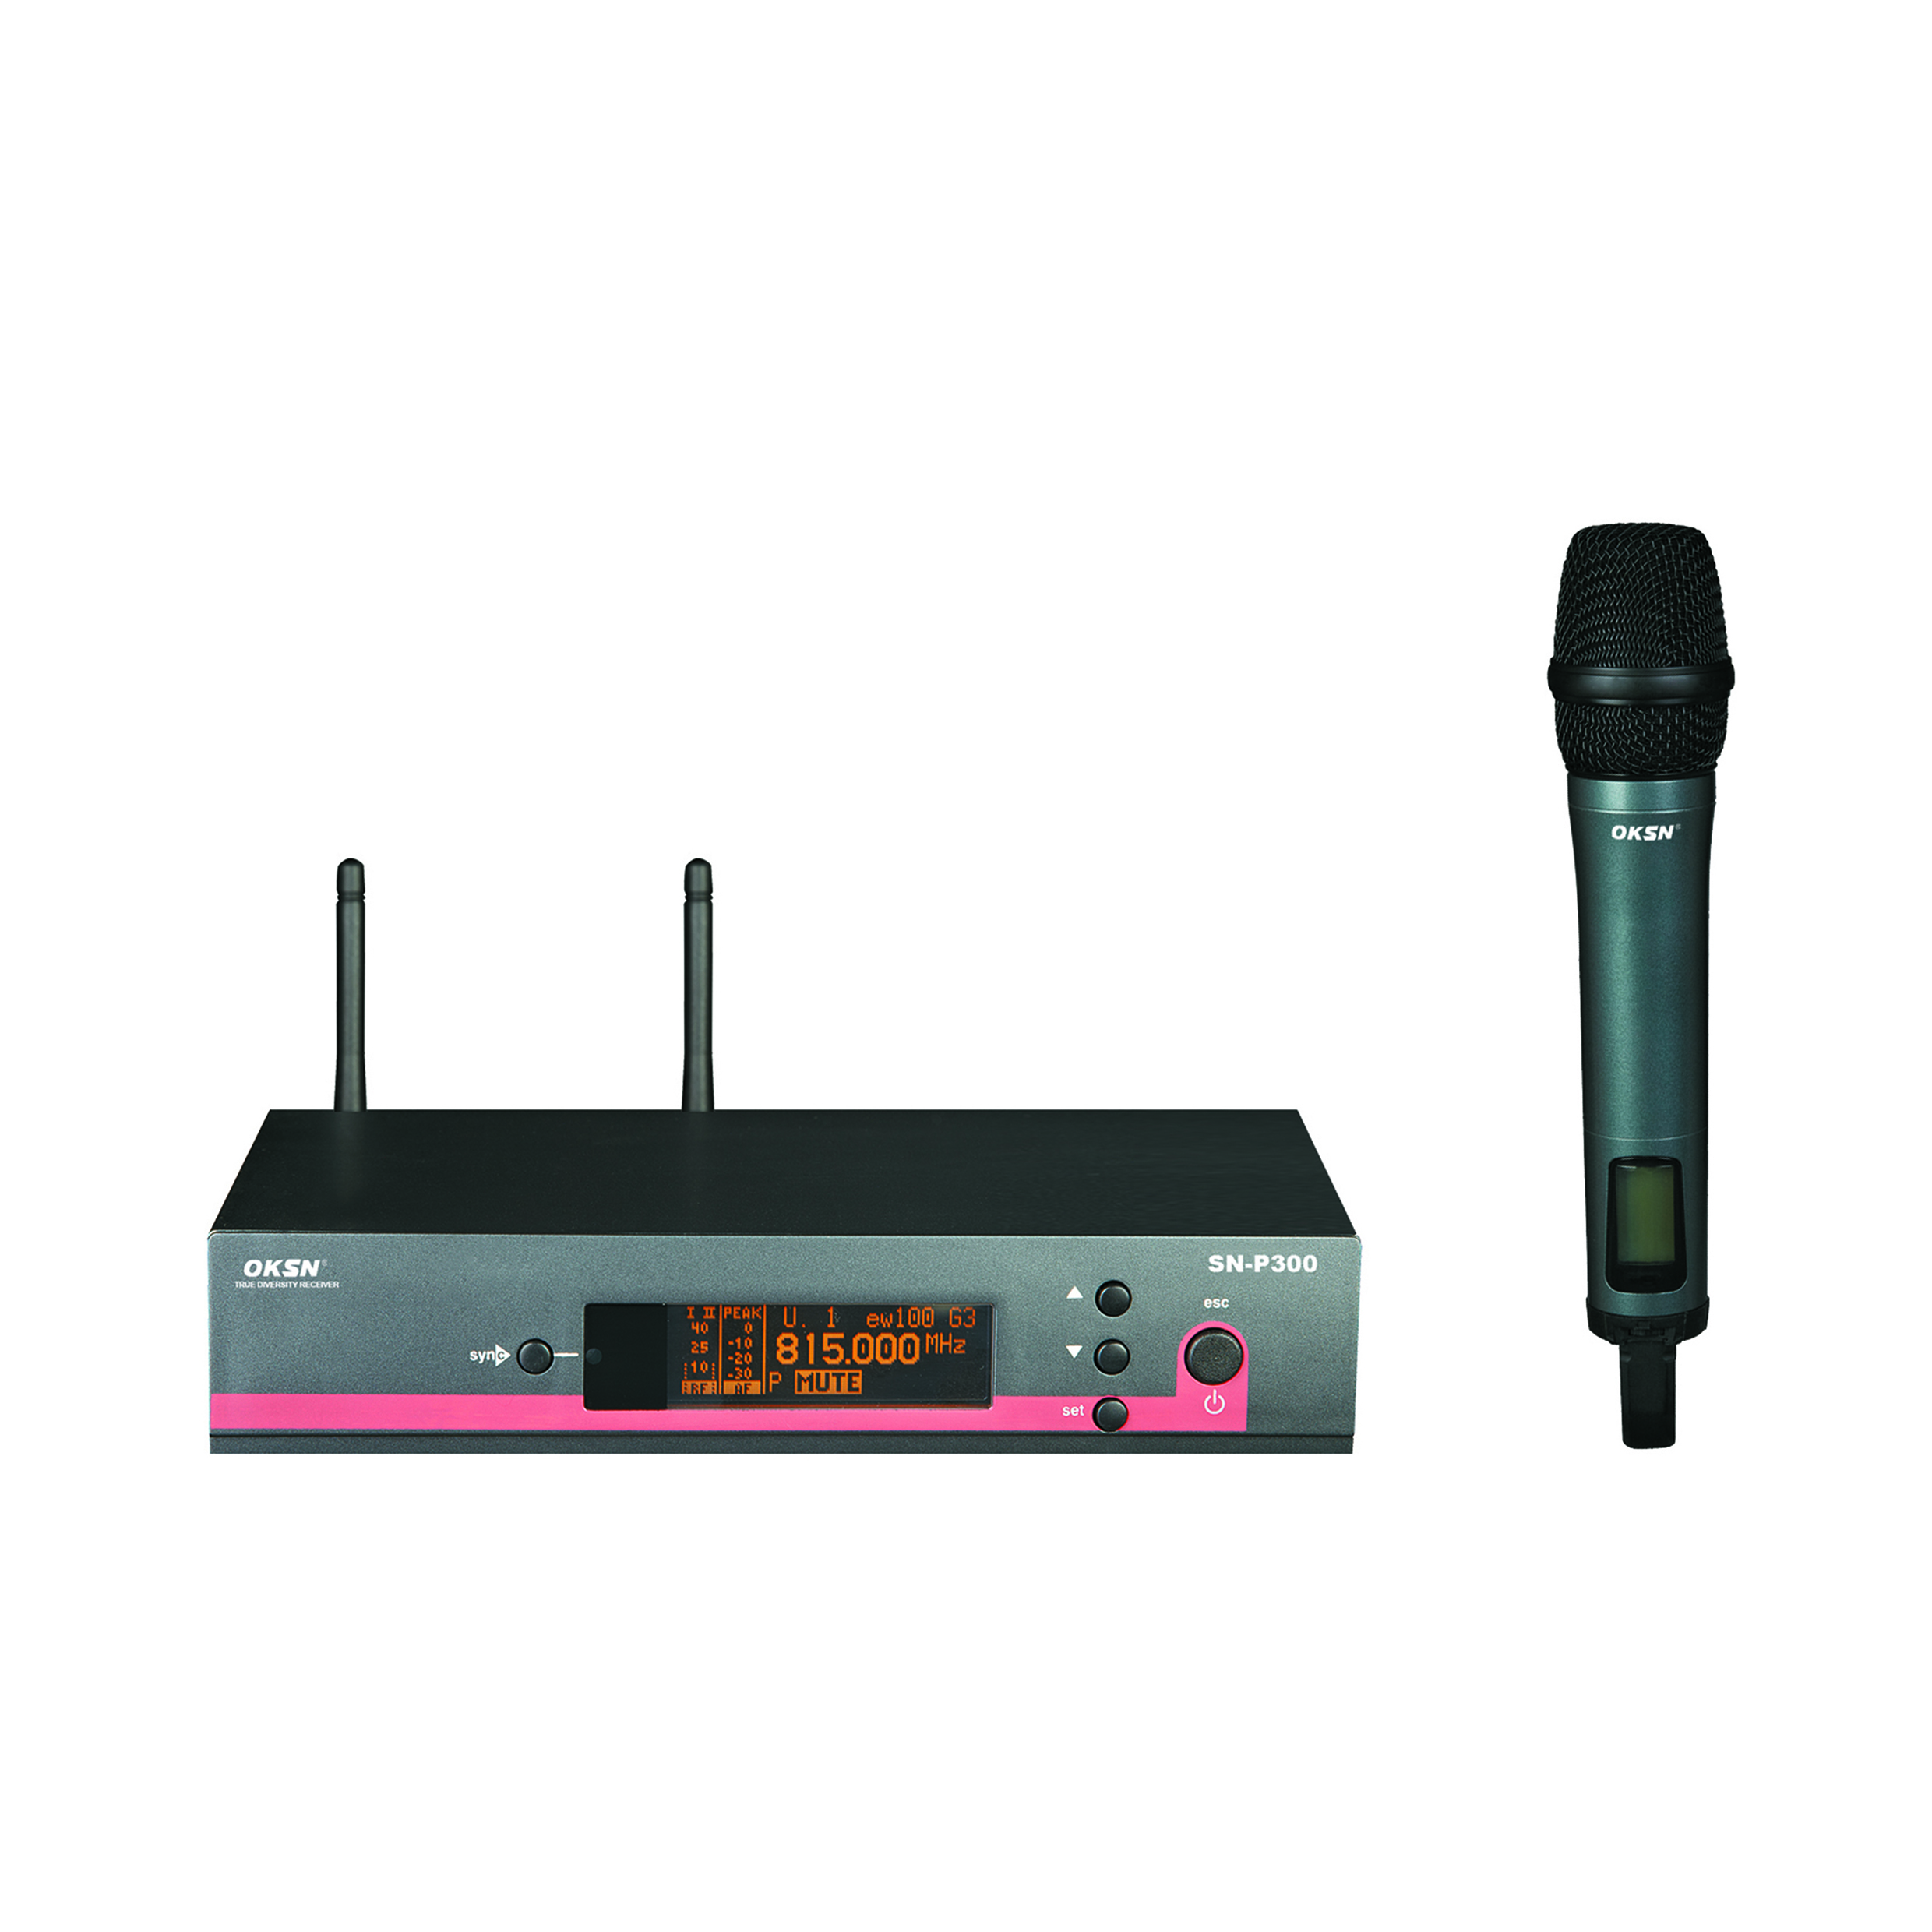 What is the Difference Between a UHF and VHF Wireless Microphone?